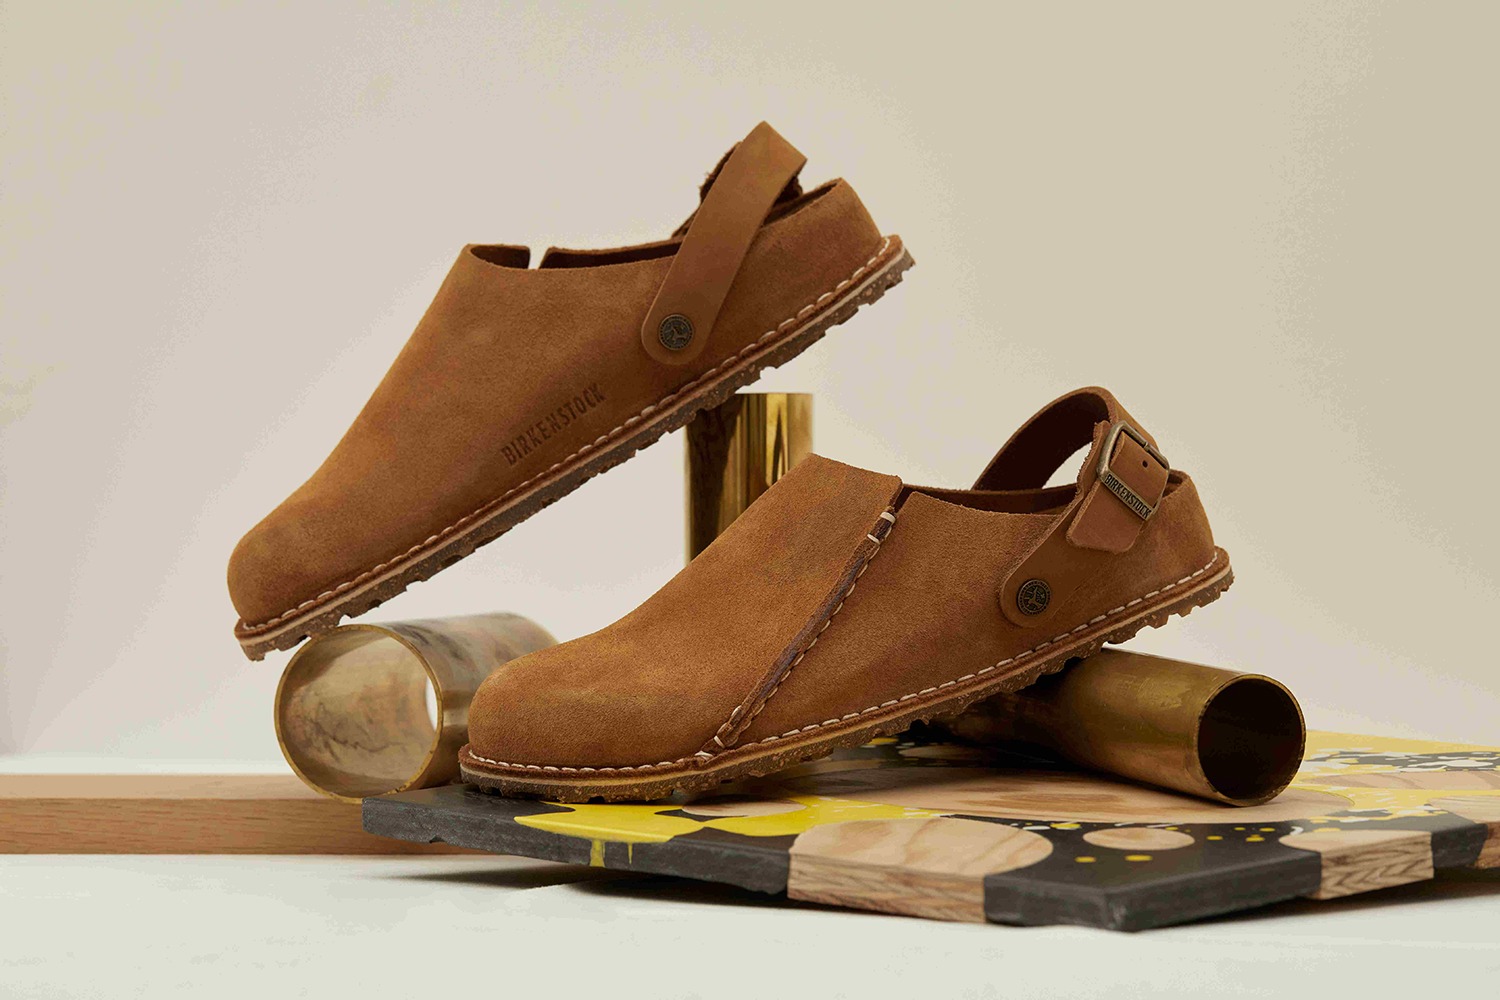 A photo of Birkenstock's new Lutry clog in brown or black suede